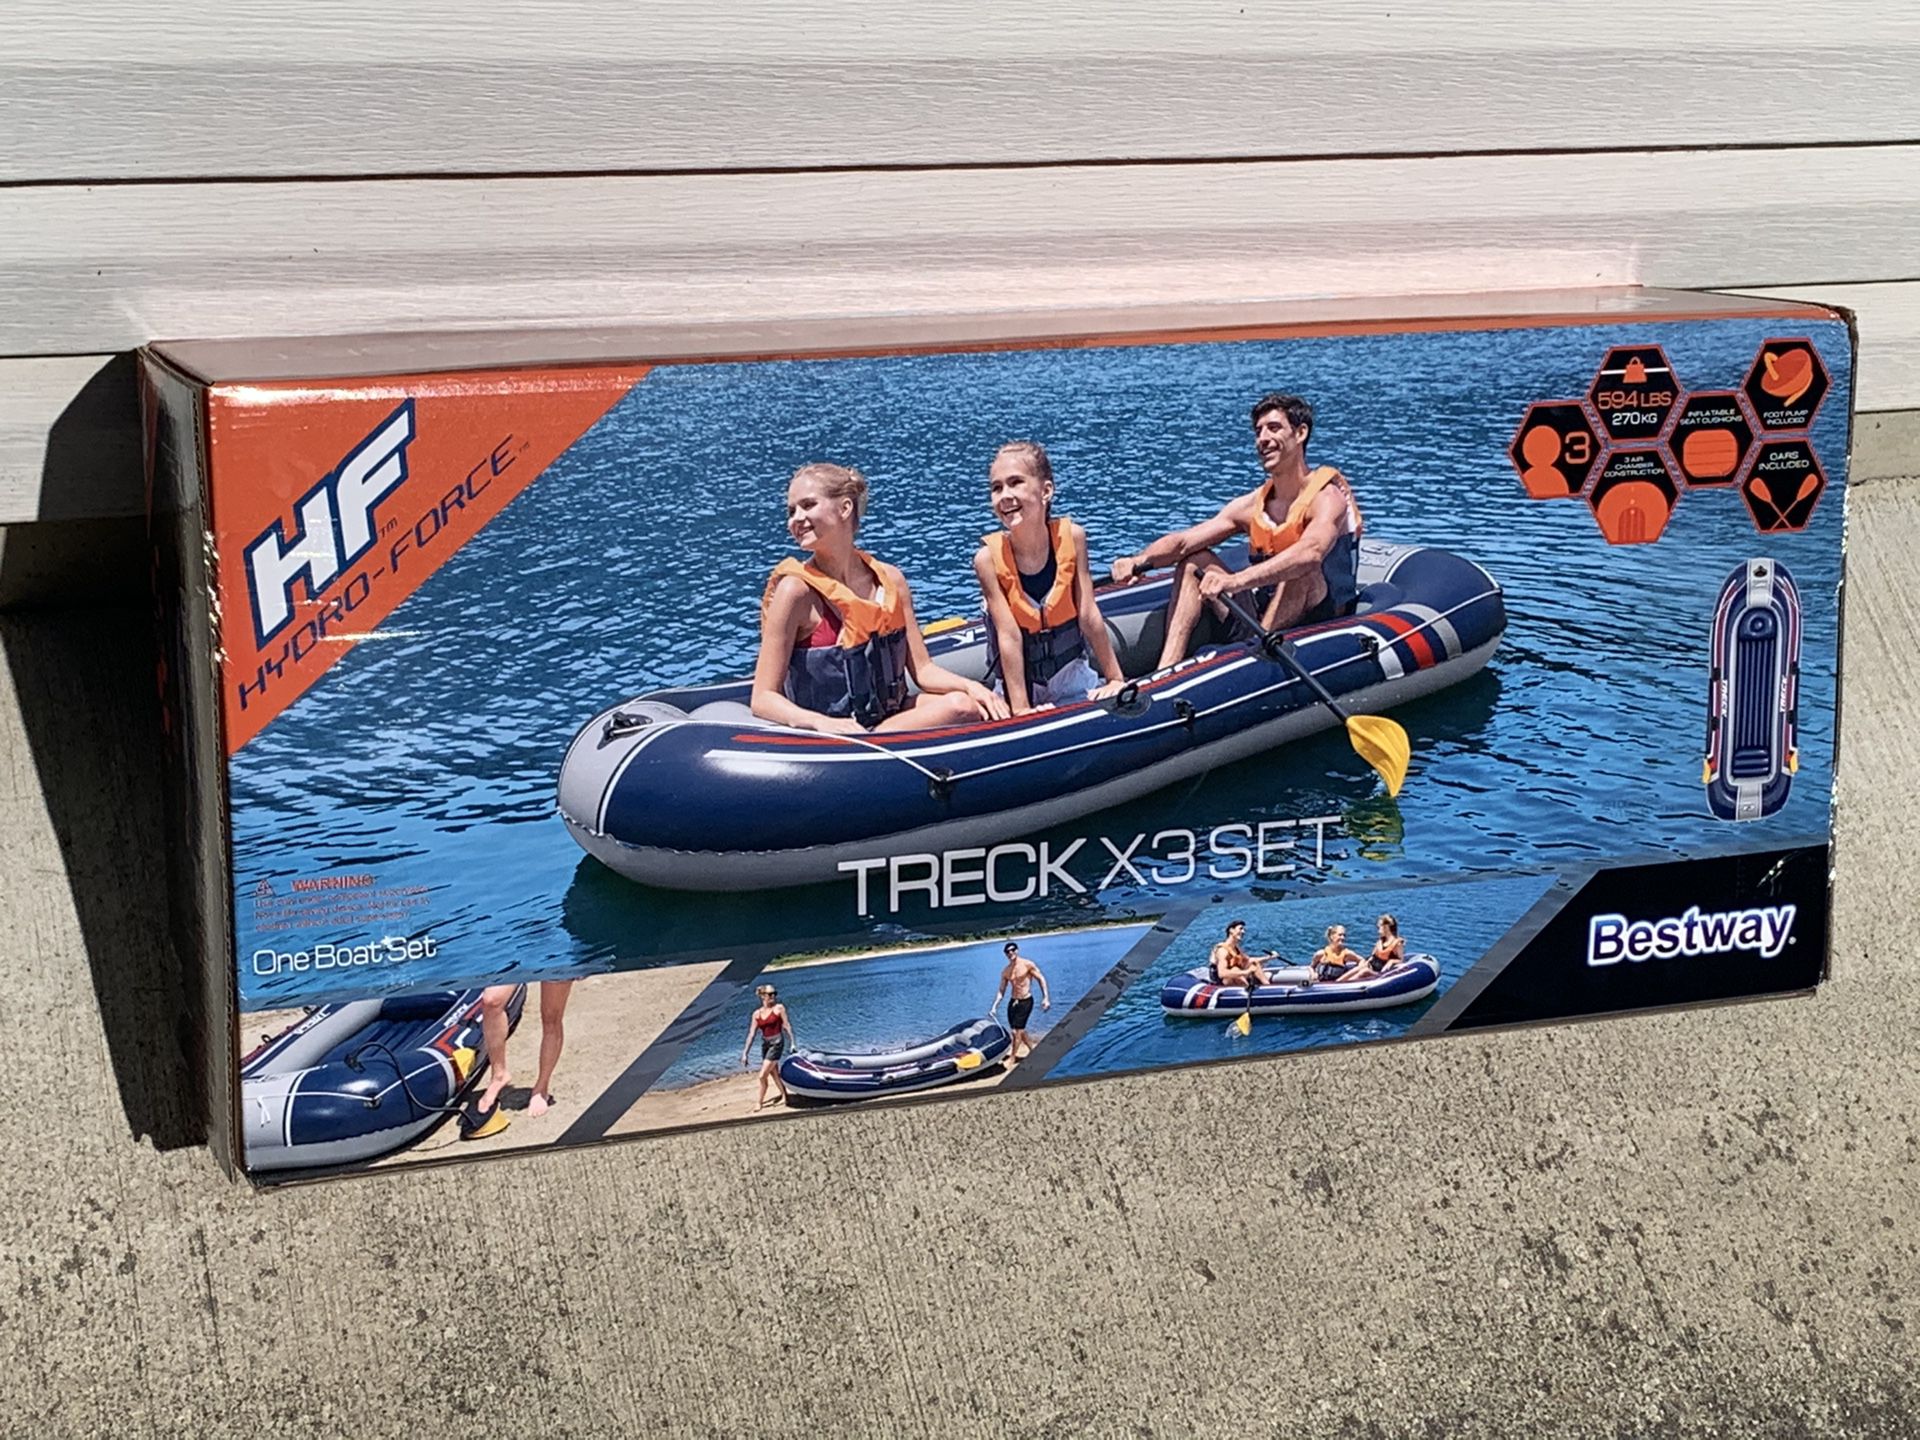 Bestway 3 Person Boat Brand New